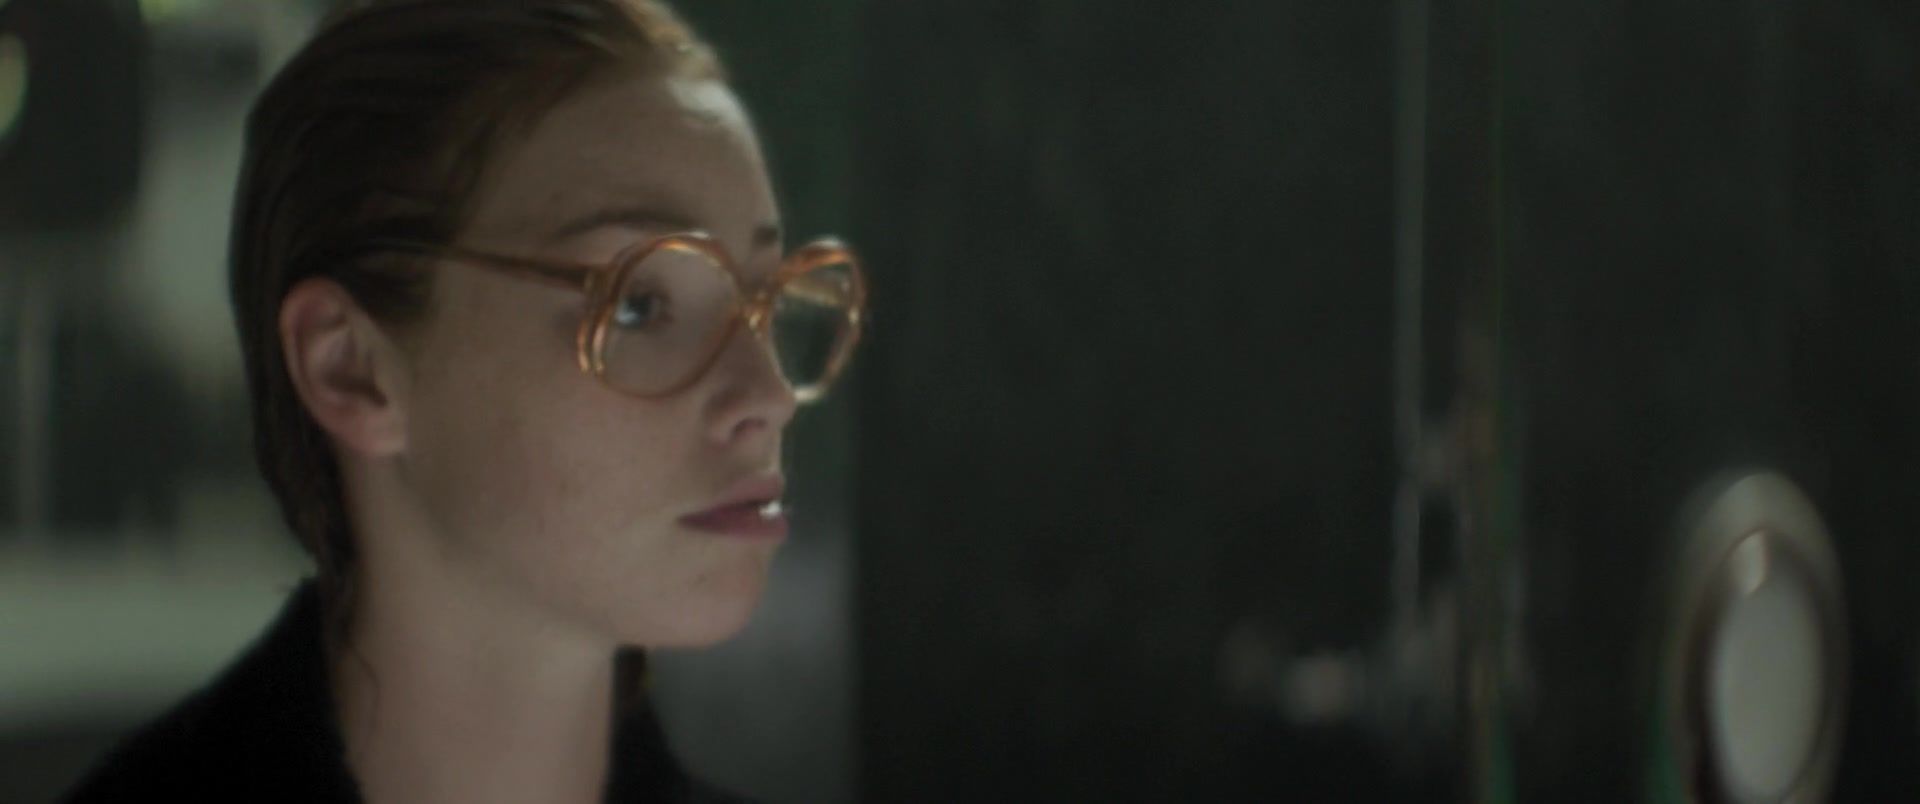 Verga Freya Mavor - The Lady in the Car with Glasses and a Gun (2015) Hot Sluts